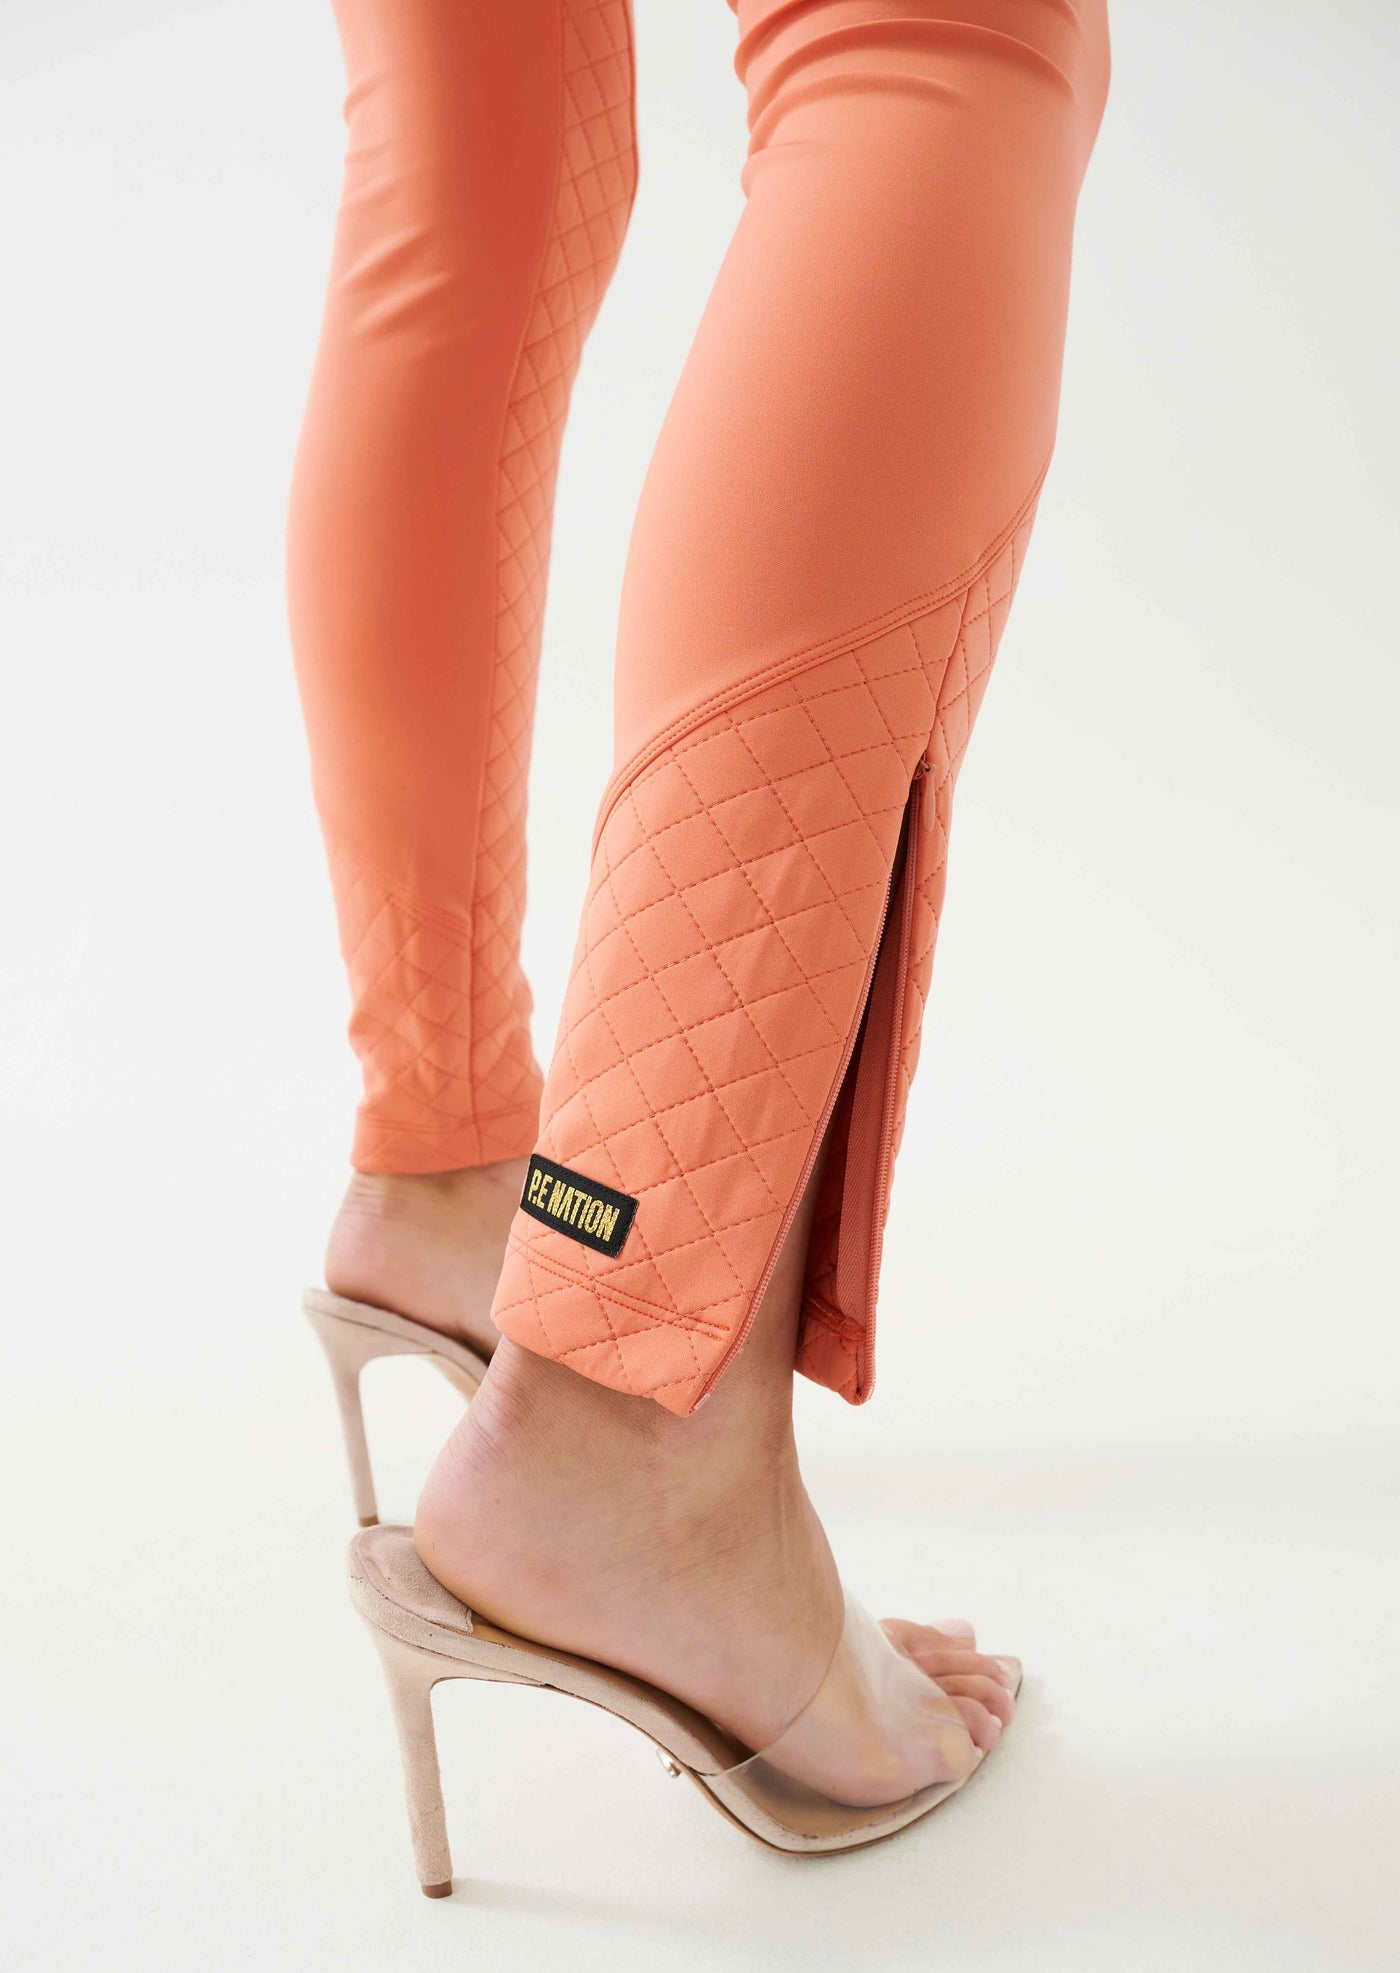 REFLECTION PANT IN ARABESQUE